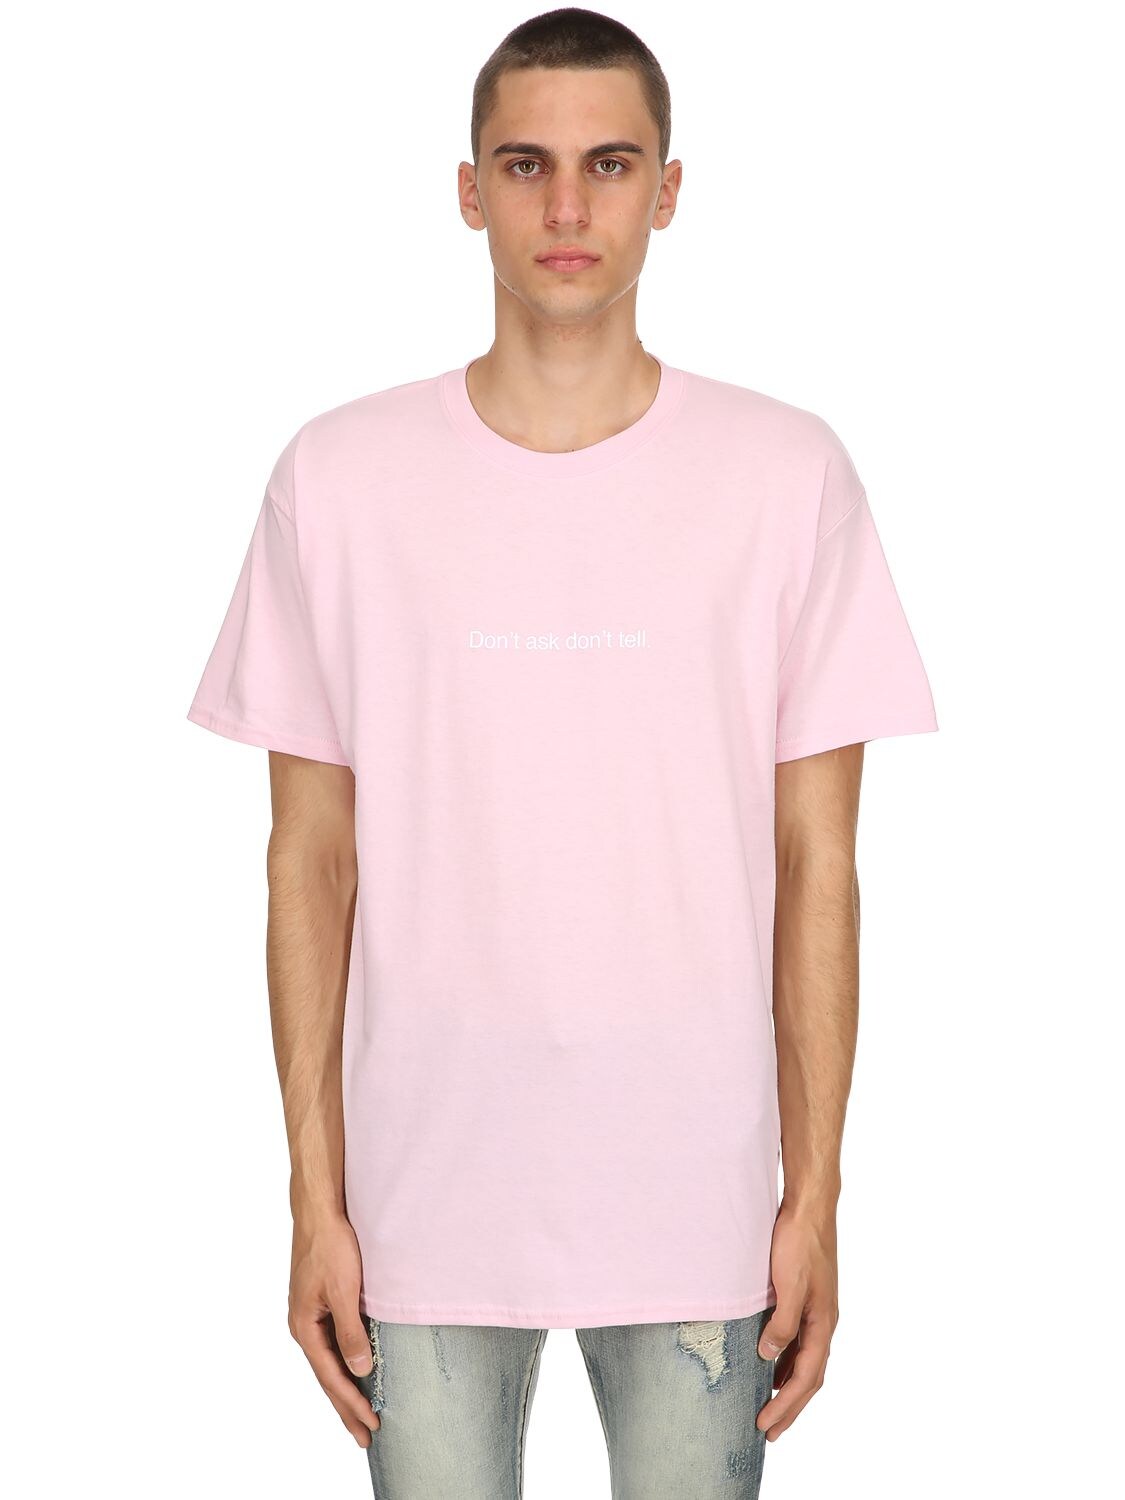 Famt - Fuck Art Make Tees Don't Ask, Don't Tell Cotton T-shirt In Pink